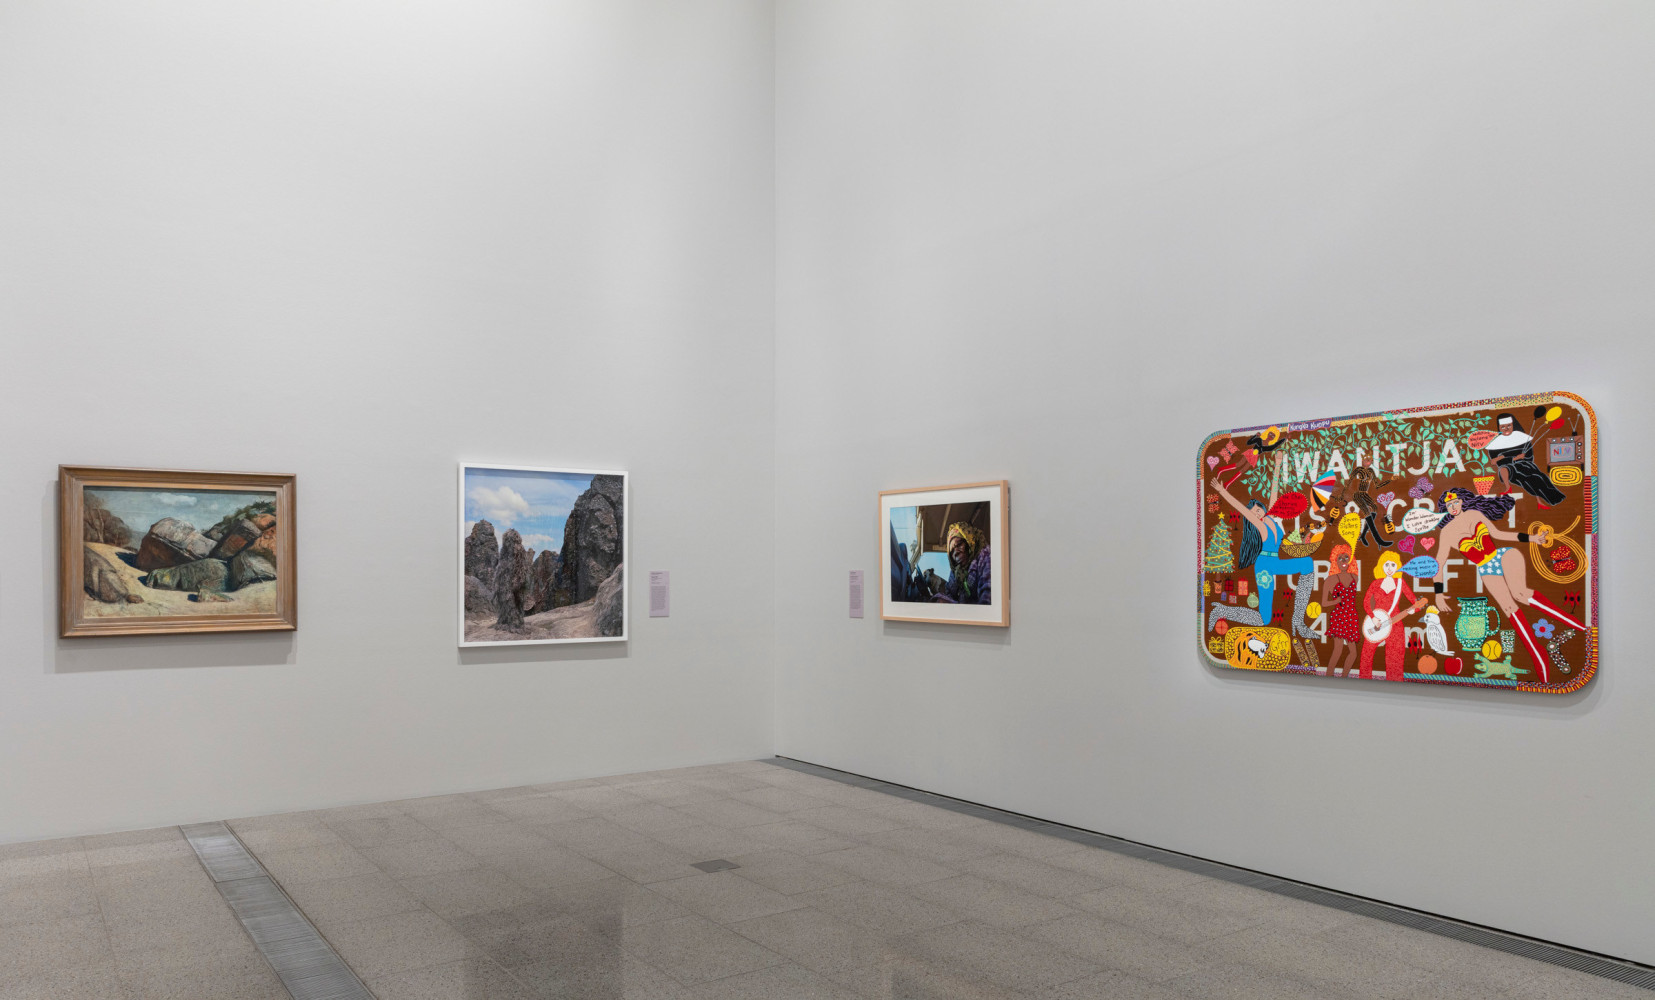 Installation view of WHO ARE YOU: Australian Portraiture at The Ian Potter Centre: NGV Australia from 25 March to 21 August 2022.  &amp;nbsp;

Photo: Tom Ross&amp;nbsp;